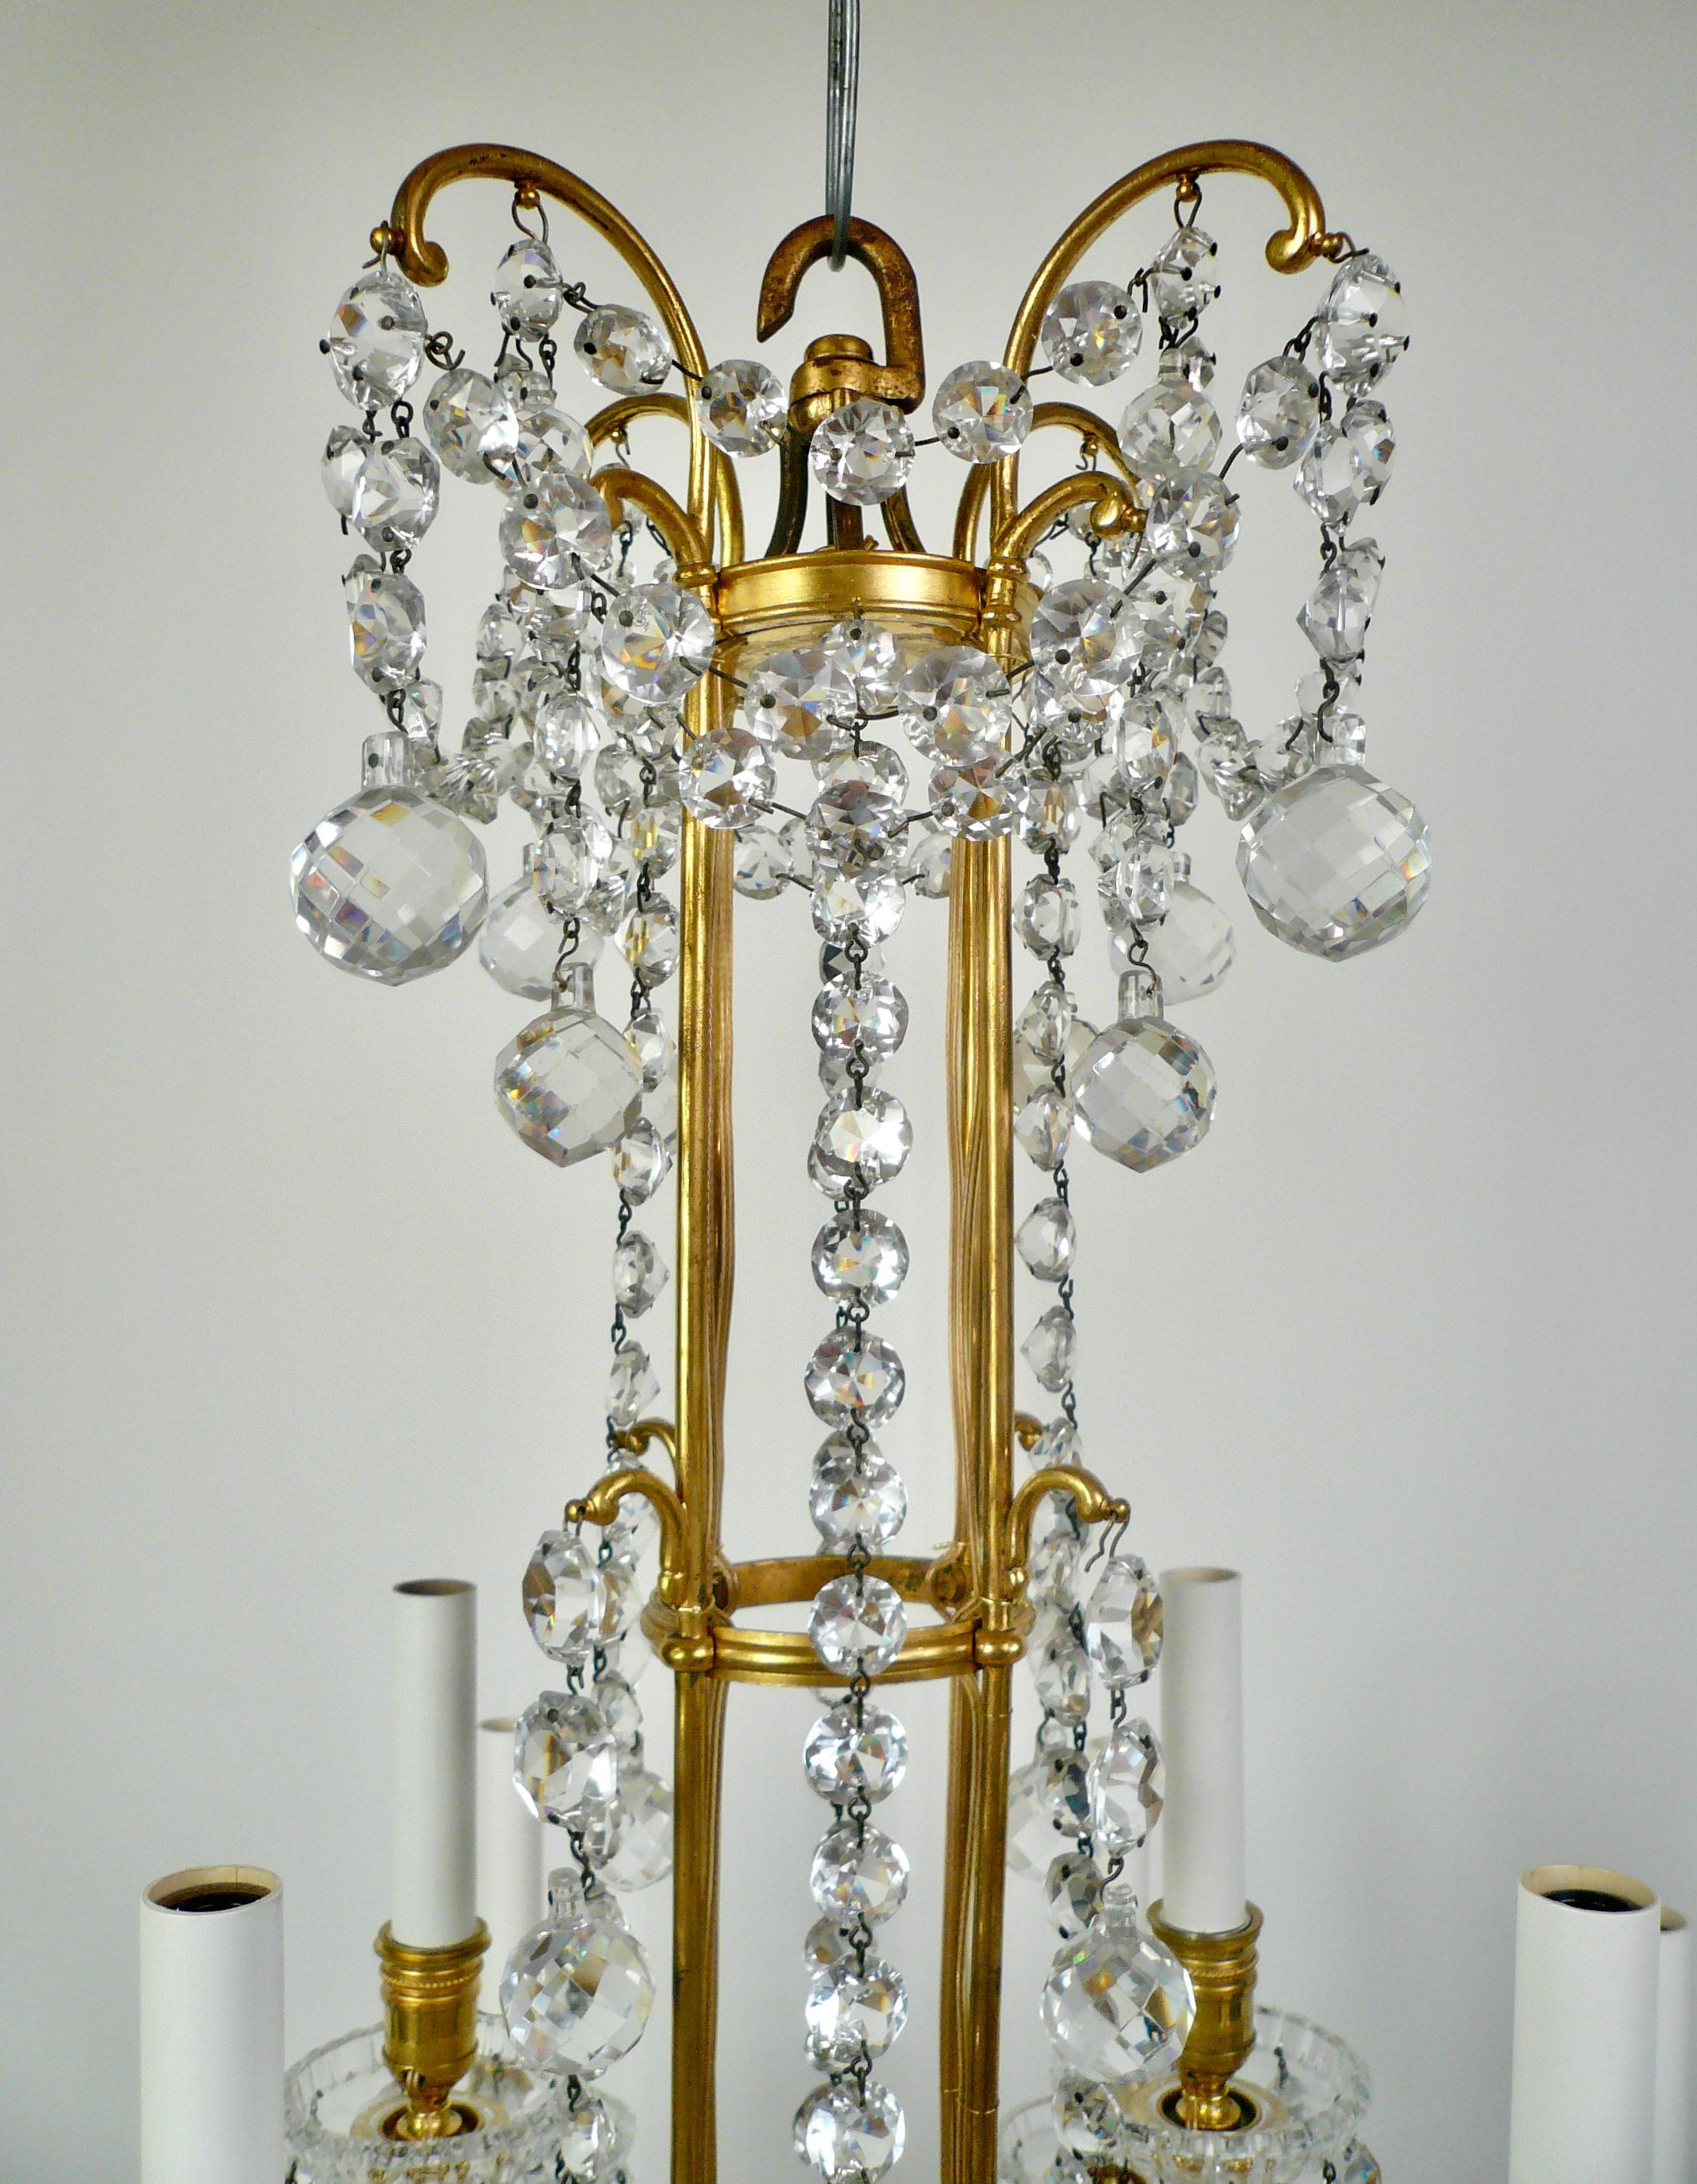 Signed Baccarat Gilt Bronze and Crystal 12 Light Chandelier, circa 1890 For Sale 6